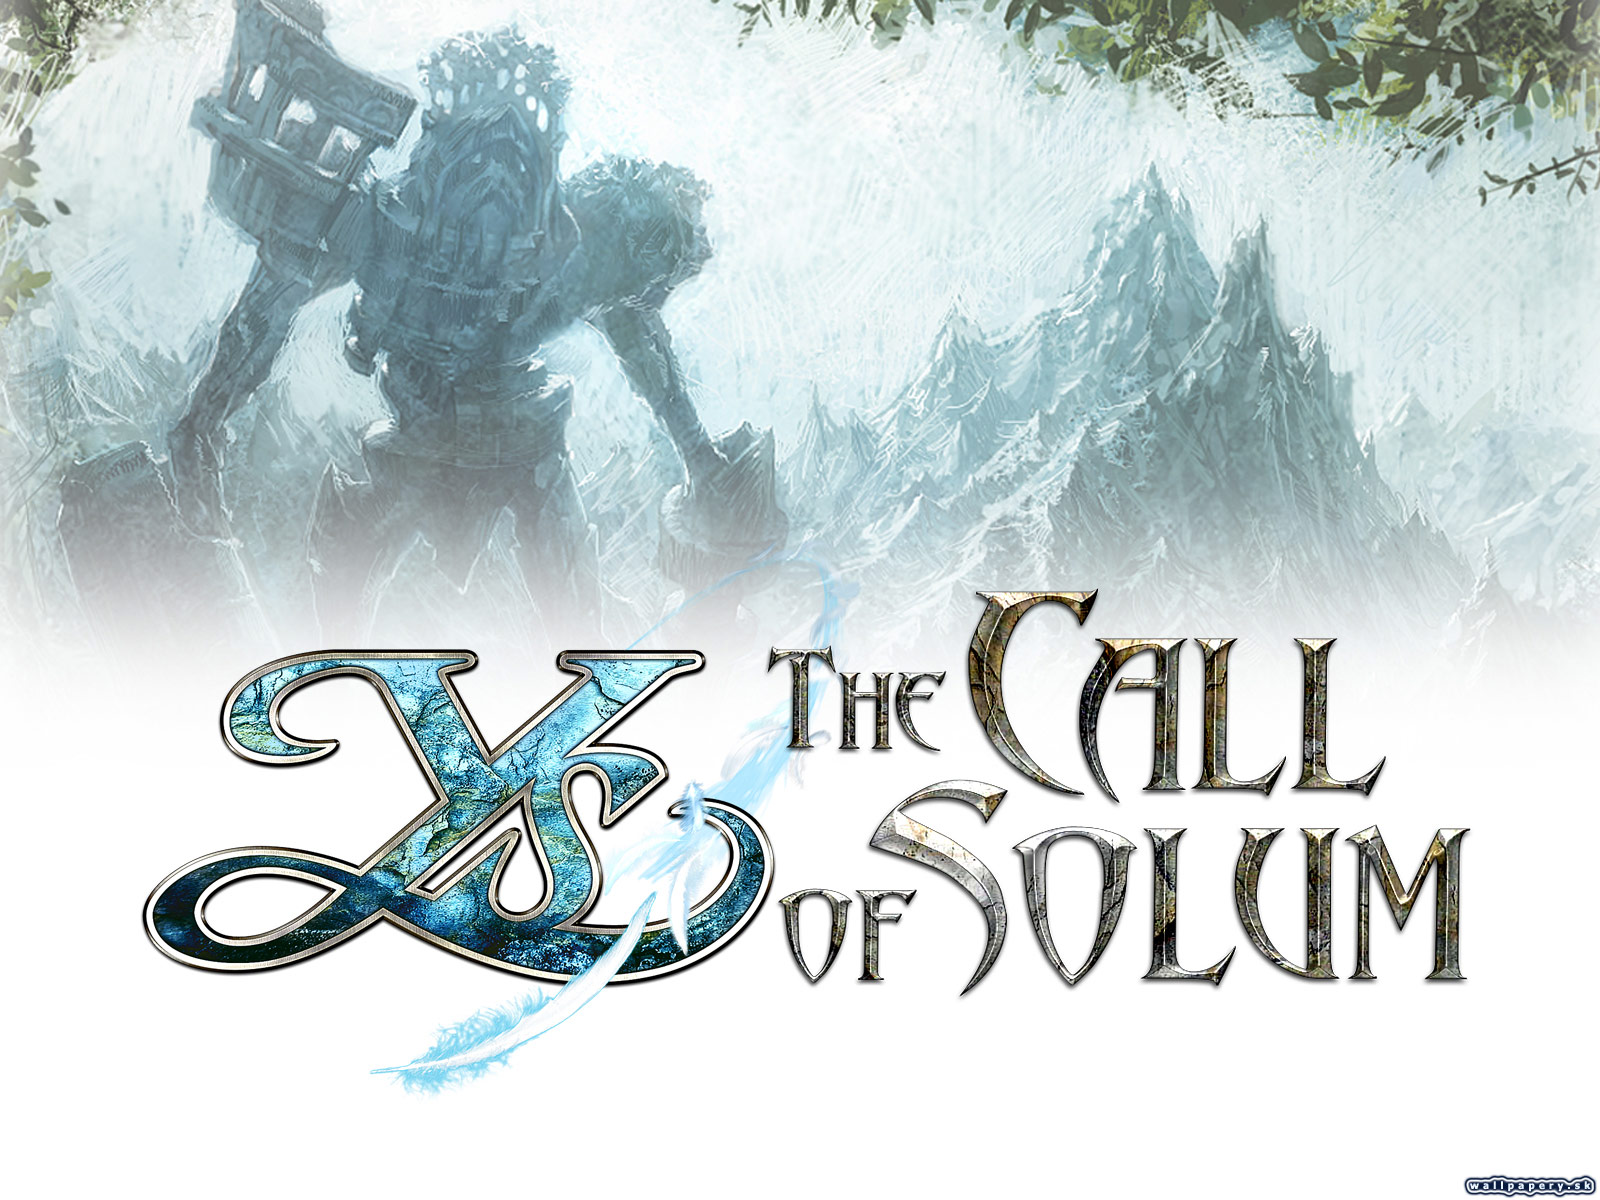 Ys Online: The Call of Solum - wallpaper 5